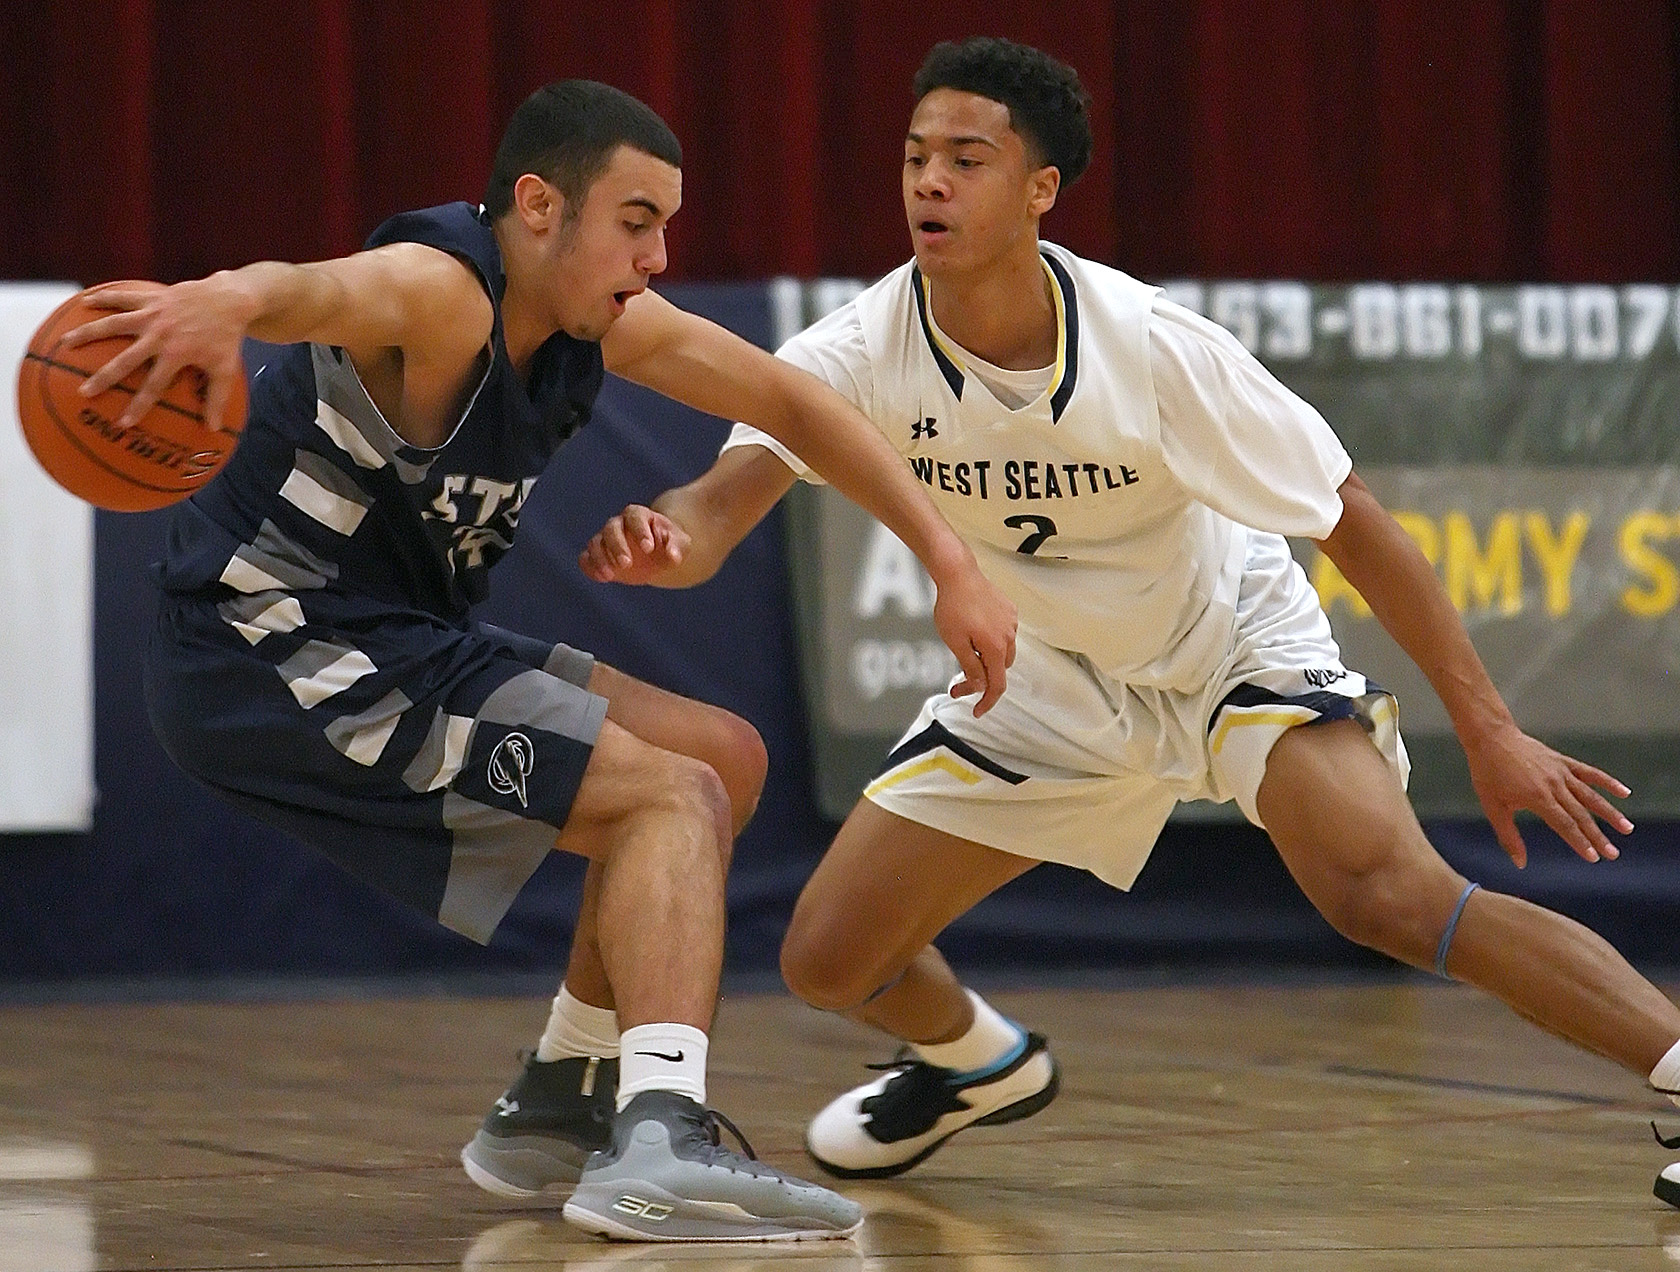 Elijah Nnanabu of West Seattle puts up a shot against defensive pressure from Squalicum's Jacob Hardy.